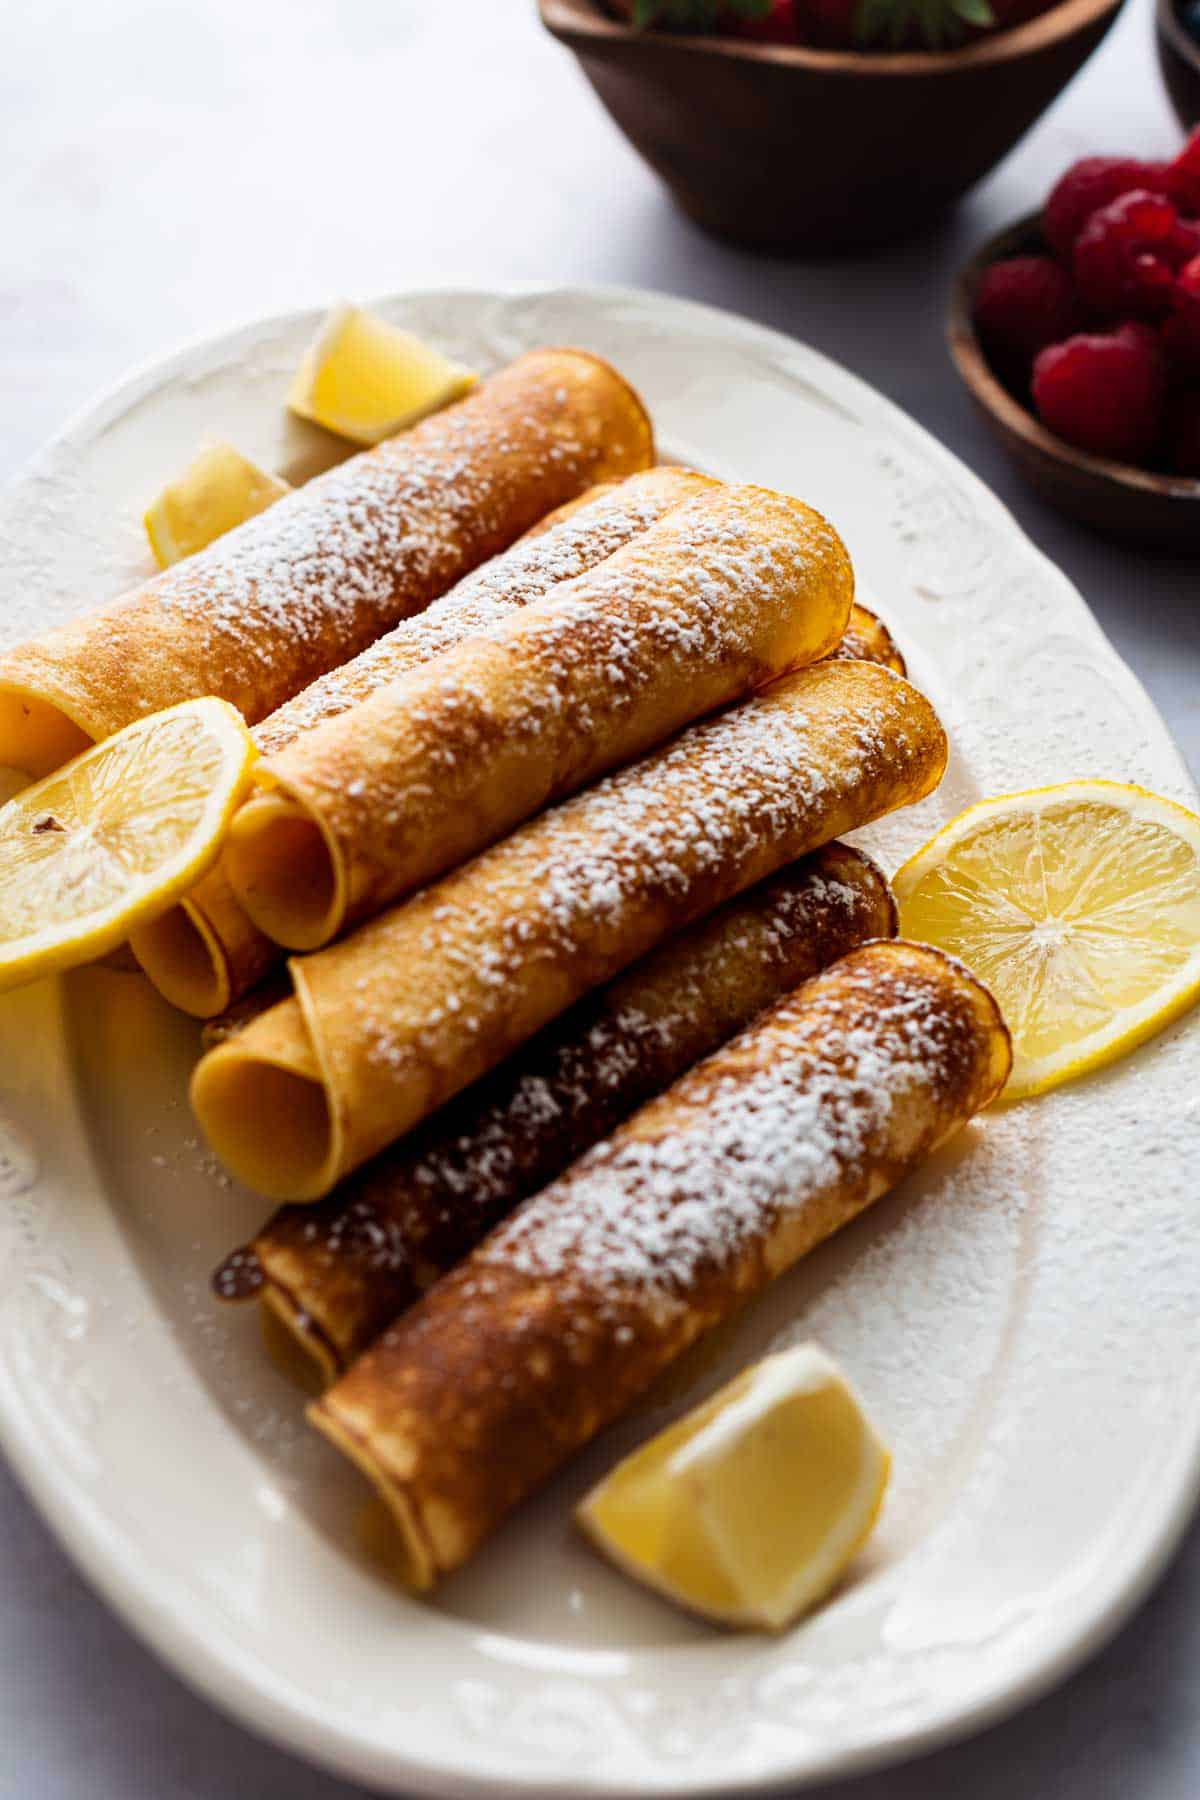 Pancakes made using the royal pancake recipe served on a white dish, decorated with lemon wedges and icing sugar.